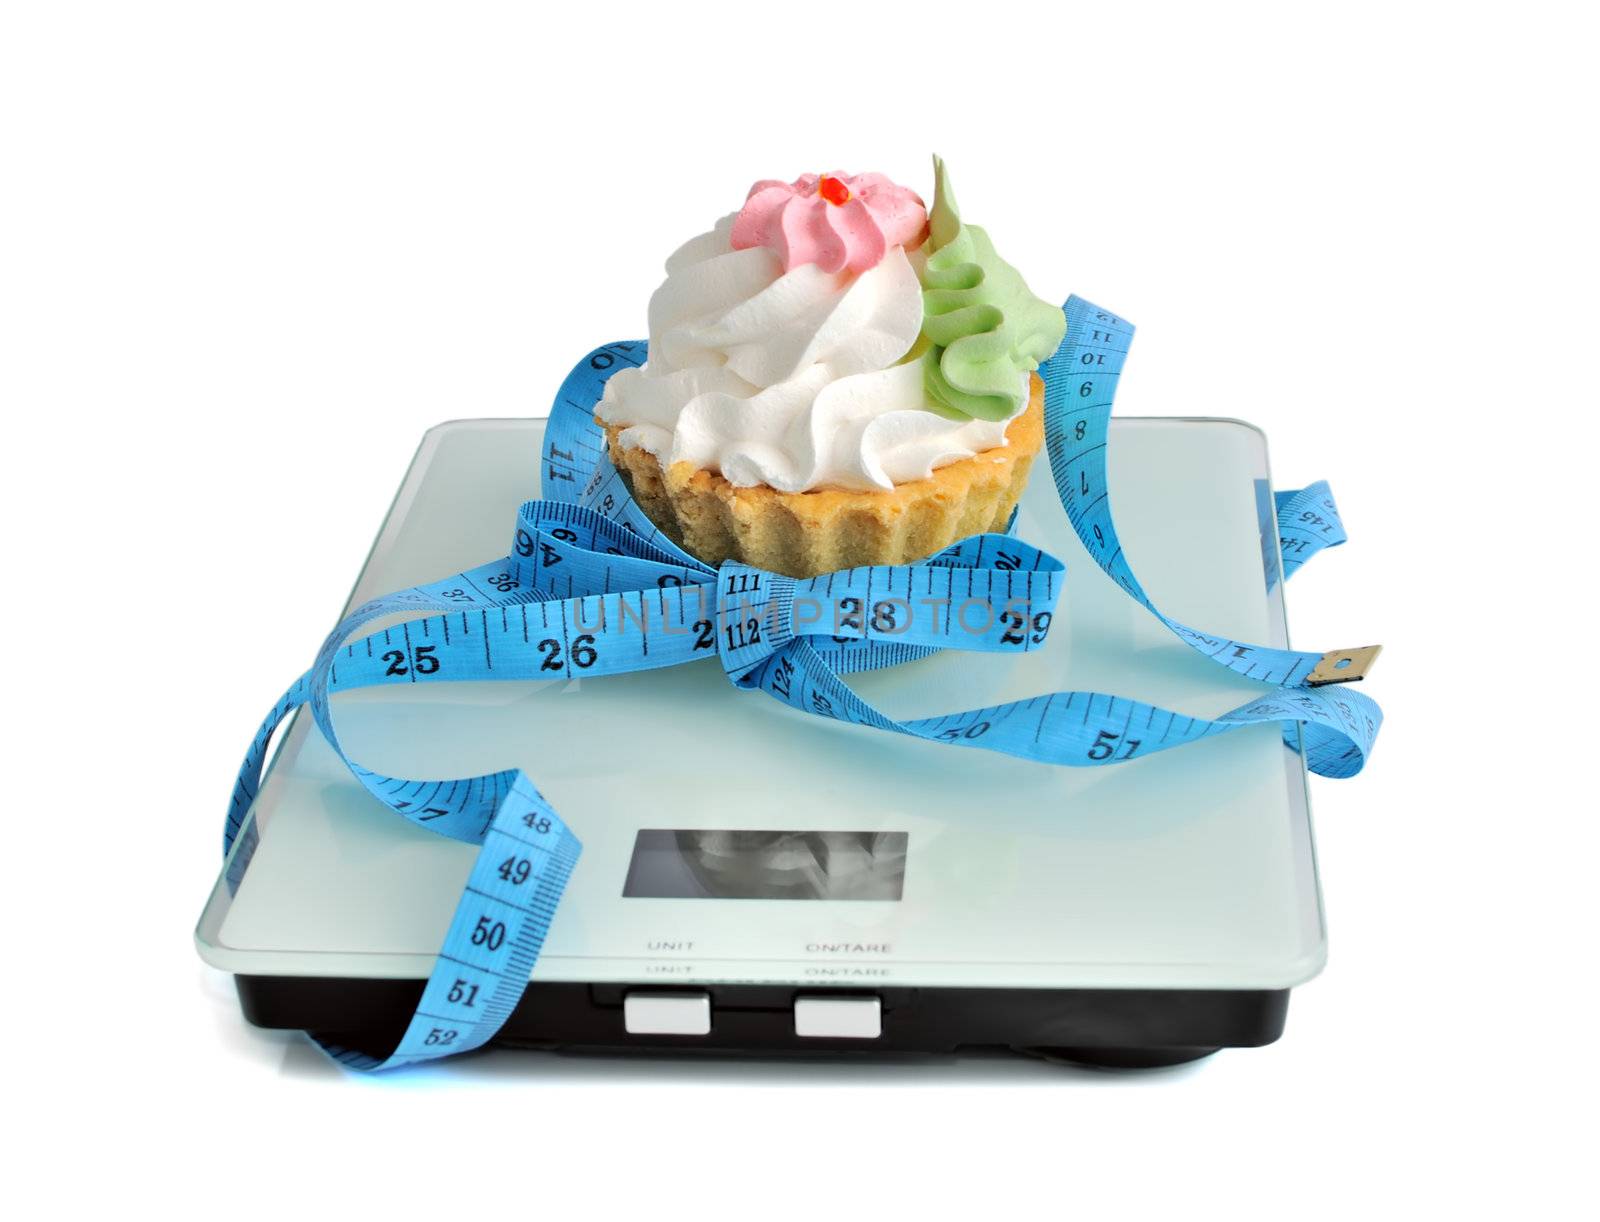 Cake on the scales measuring tape wrapped by Apolonia